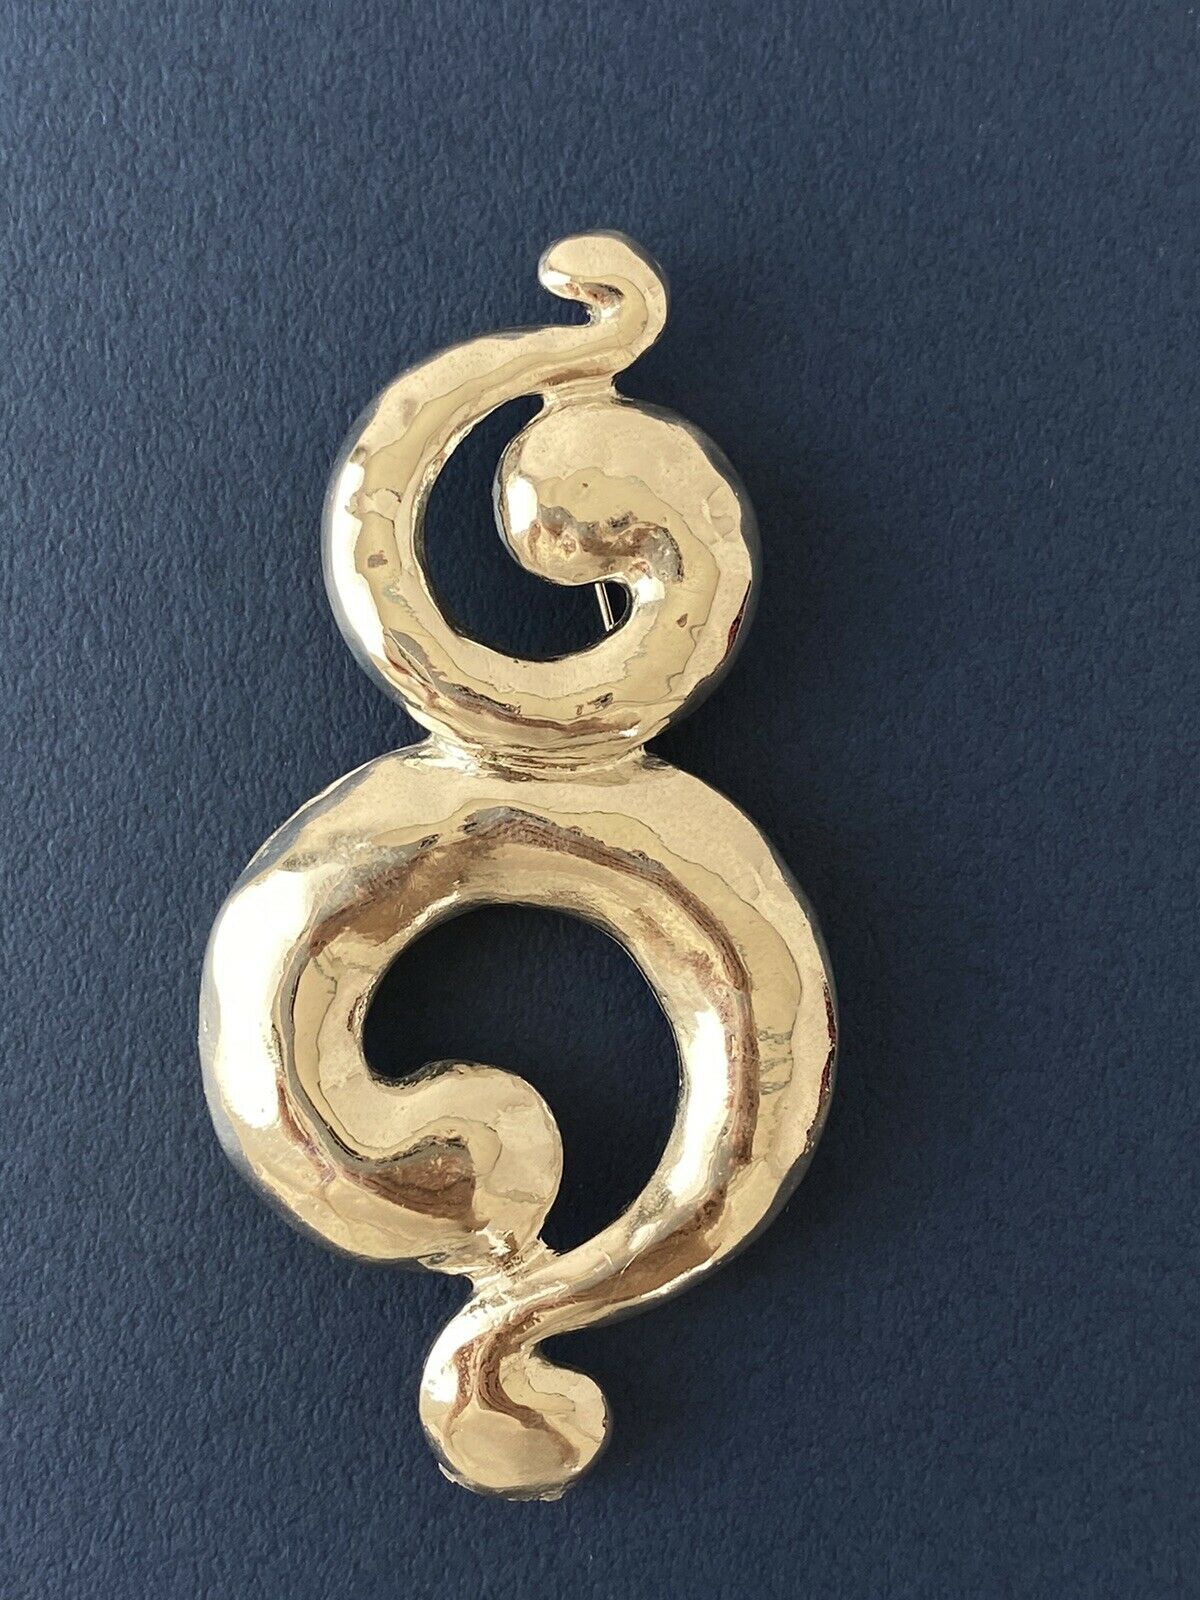 【SOLD OUT】YSL Yves Saint Laurent Vintage Massive Silver Tone Coil Spiral Brooch Pin